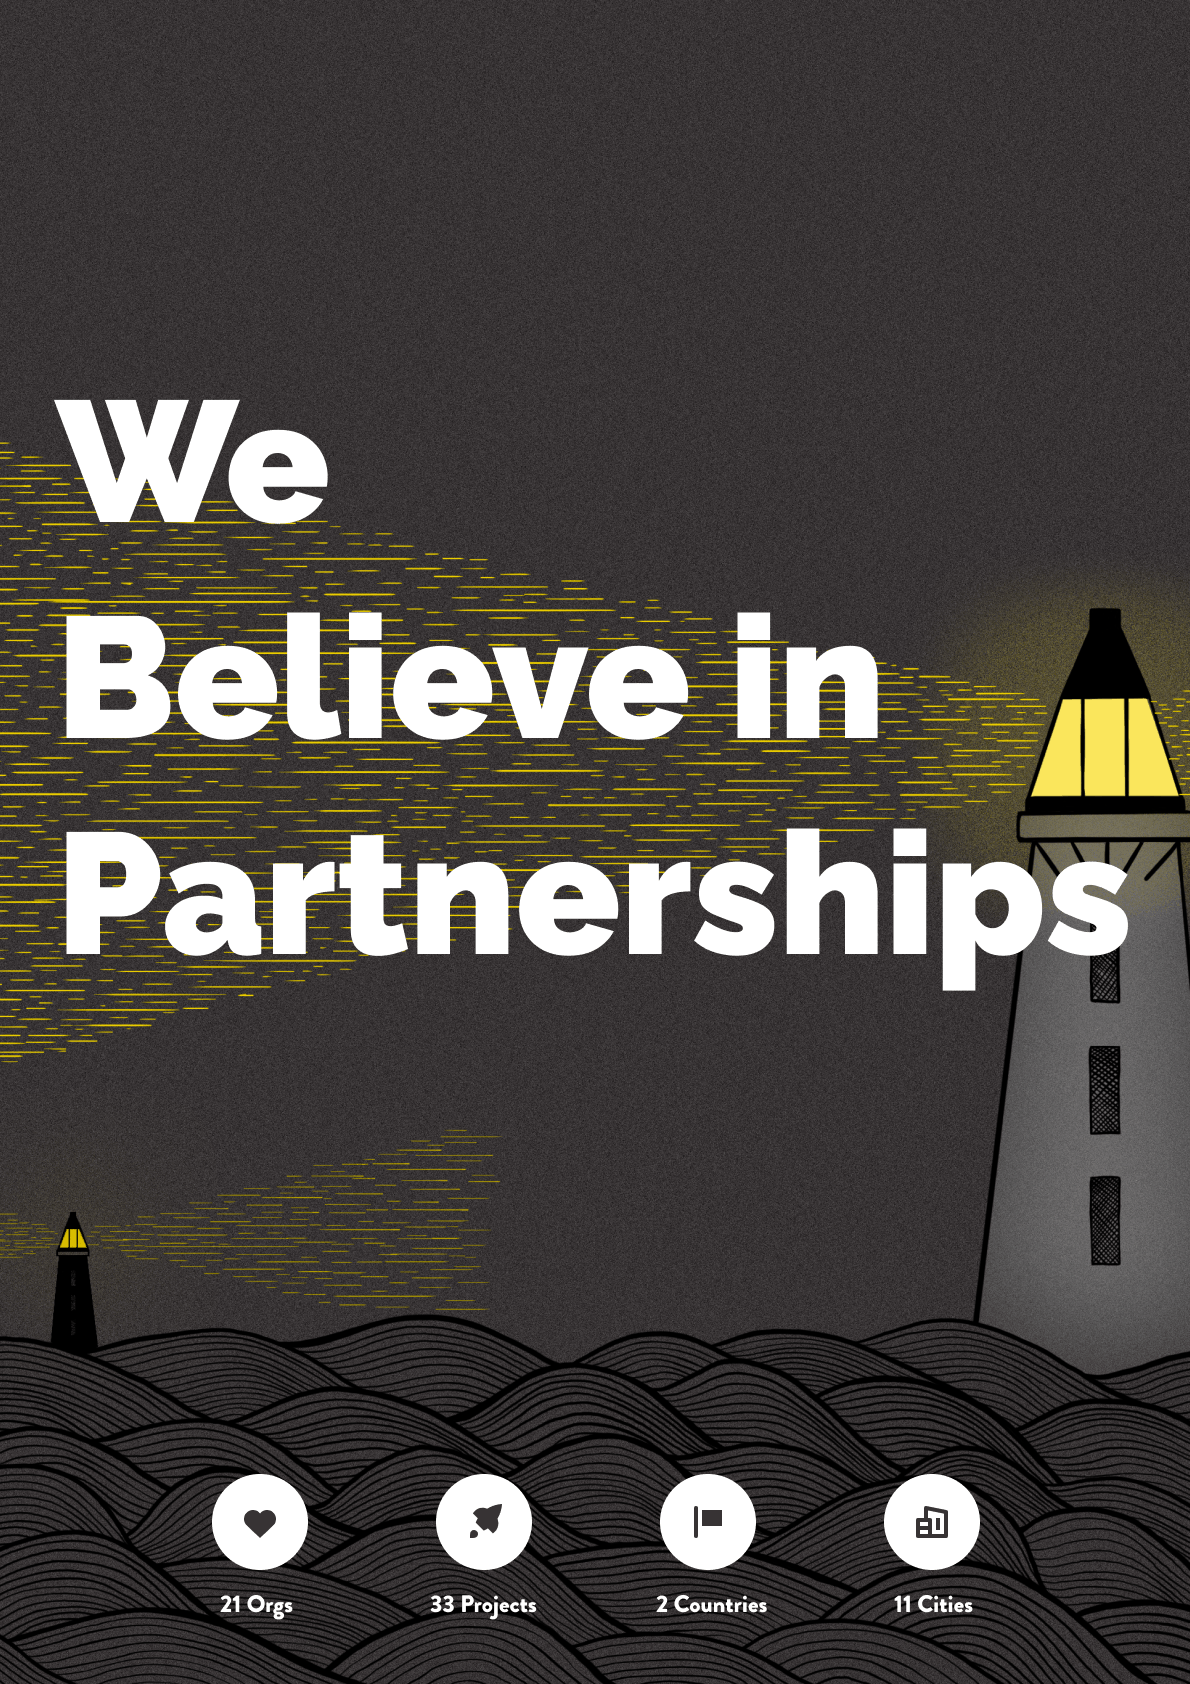 We Believe in Partnerships text - with the sea at night and a lighthouse